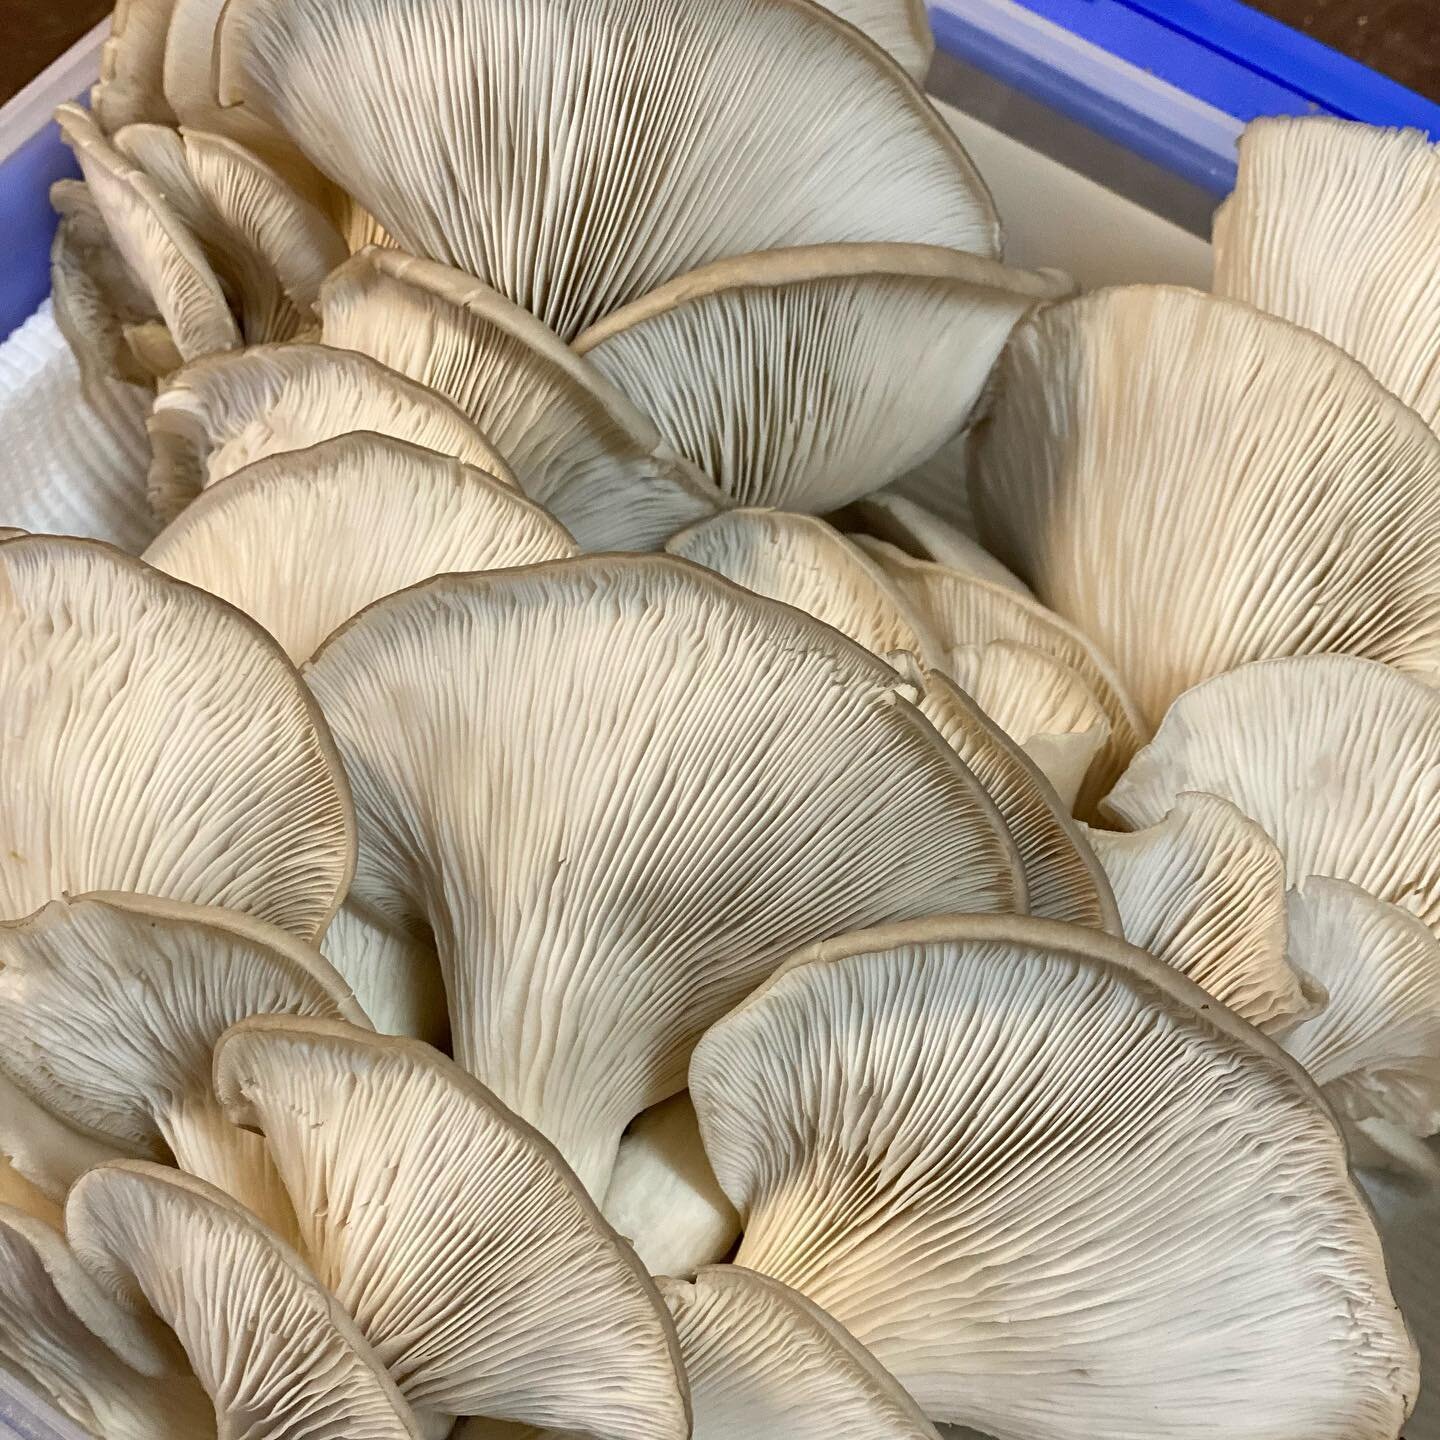 Our mushie grower spoils us! 😍 
Check out these babies. Not only does Craig from Fungi and Friends grow these mushies on organic sugarcane straw, (supplying the farm with the healthiest, freshest mushrooms around), he even brought us a batch of mush